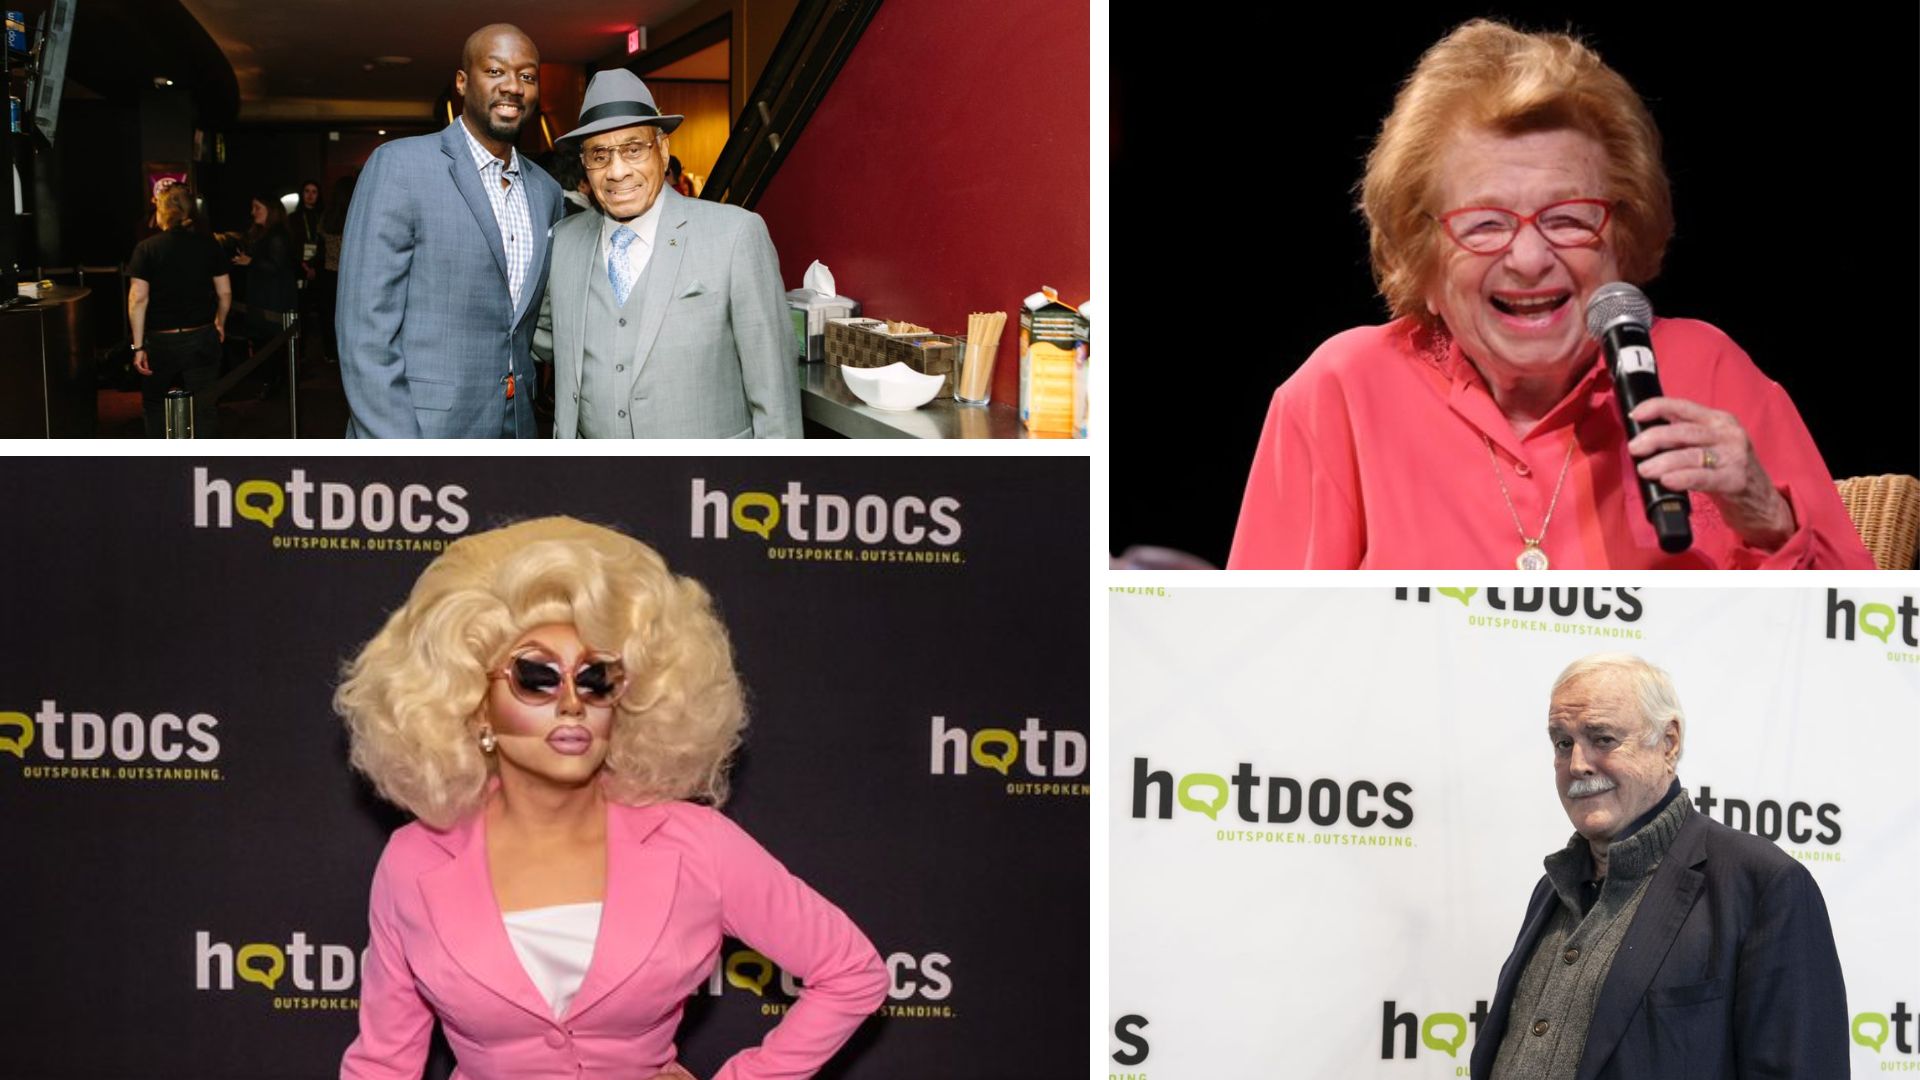 Collage of four photographs of Willie O’Ree, Trixie Mattel, Dr. Ruth and John Cleese